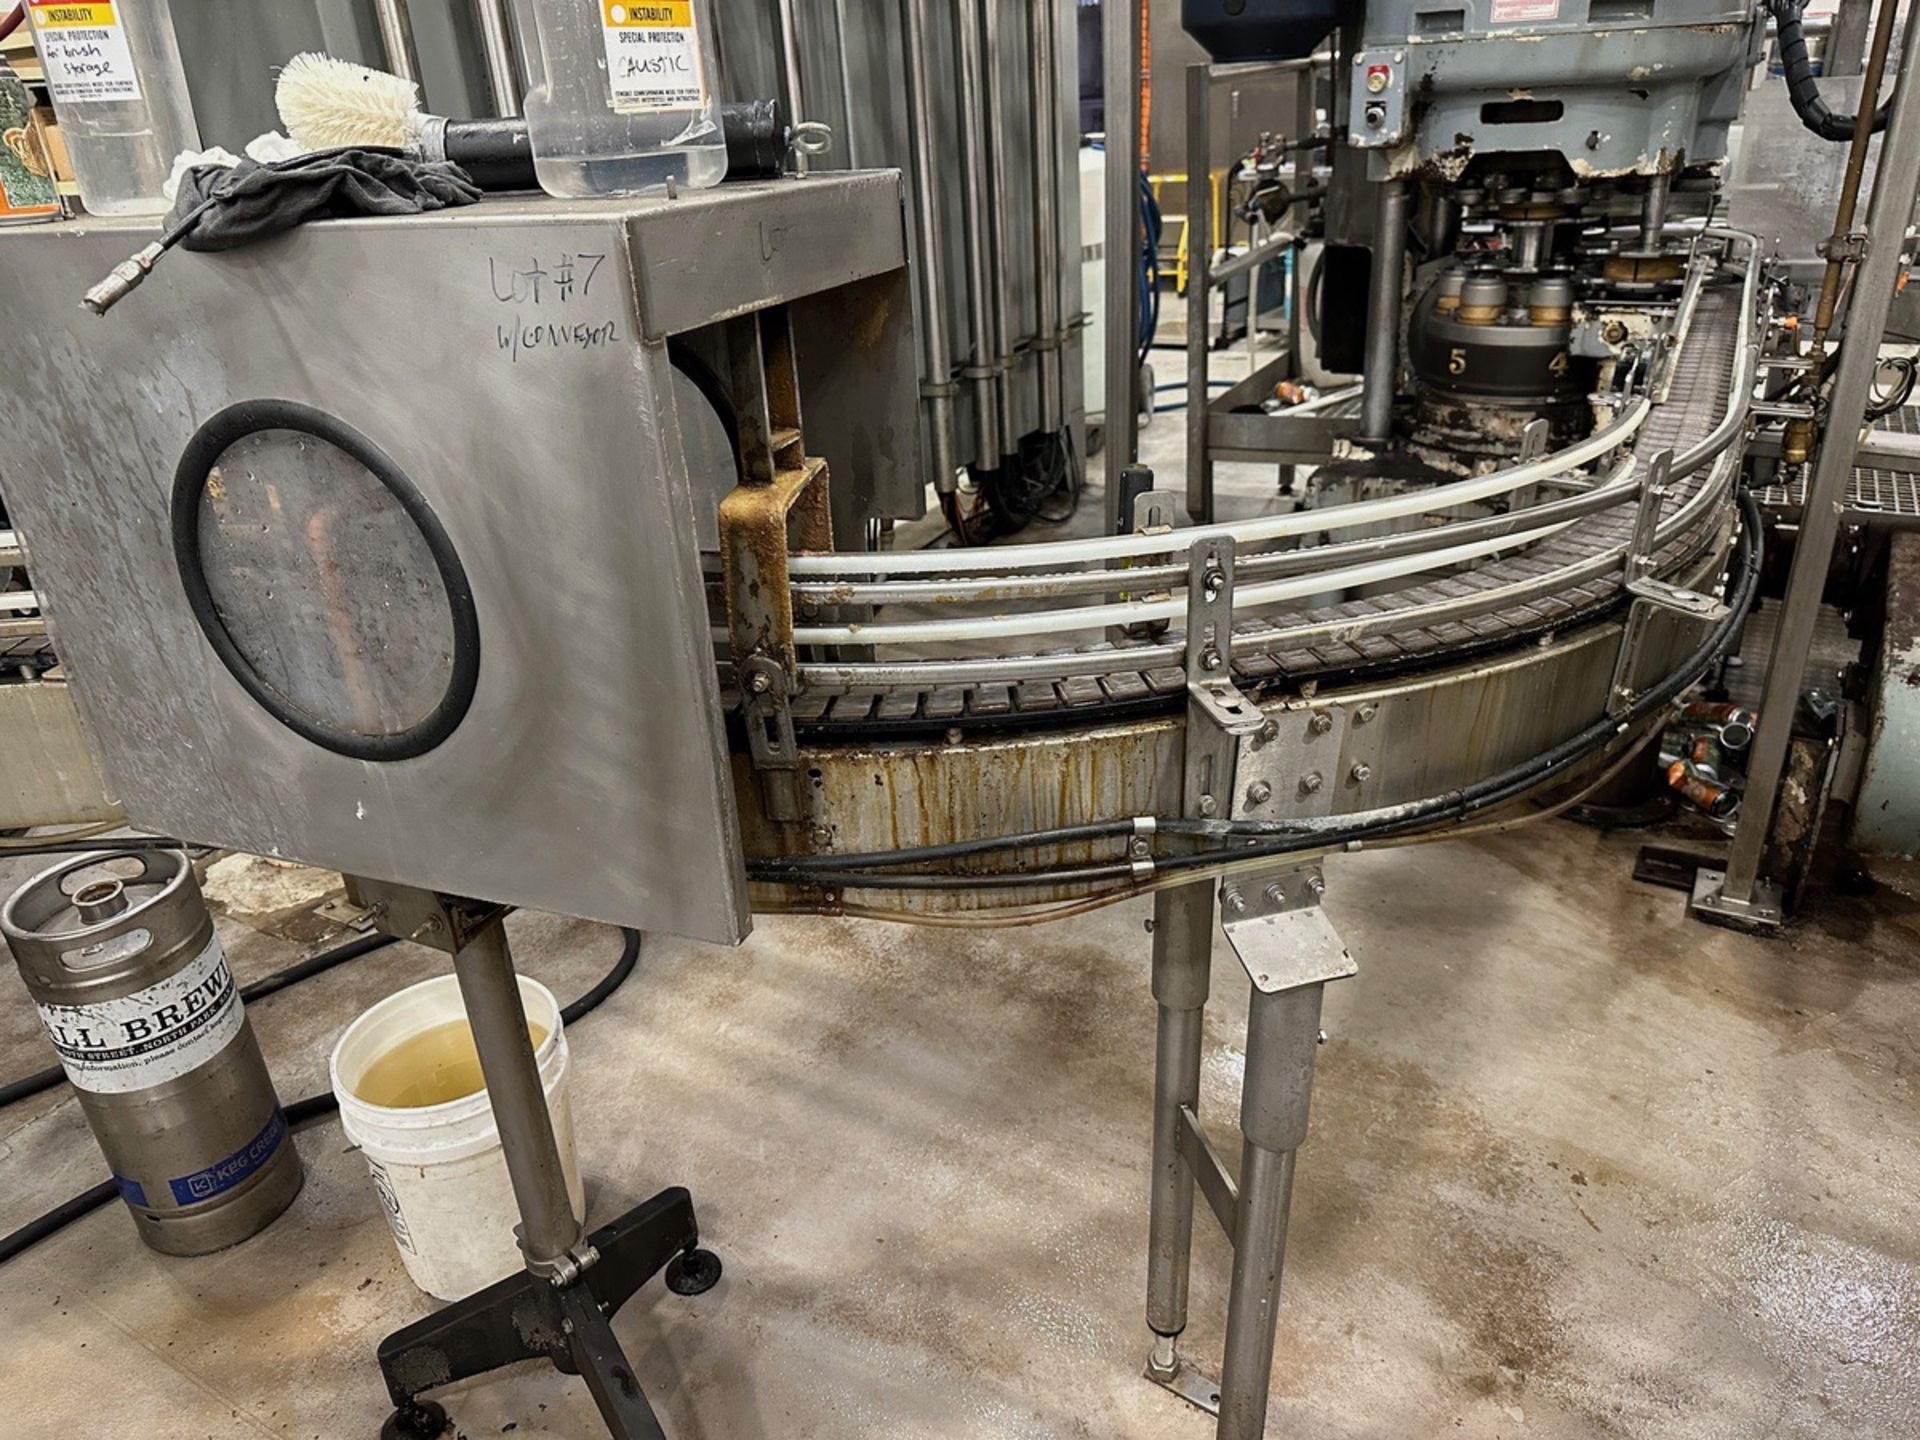 Bevco S Shaped Curved Conveyor with Rinse Tunnel - 4.5" Belt and Approx. 18' Linear | Rig Fee $550